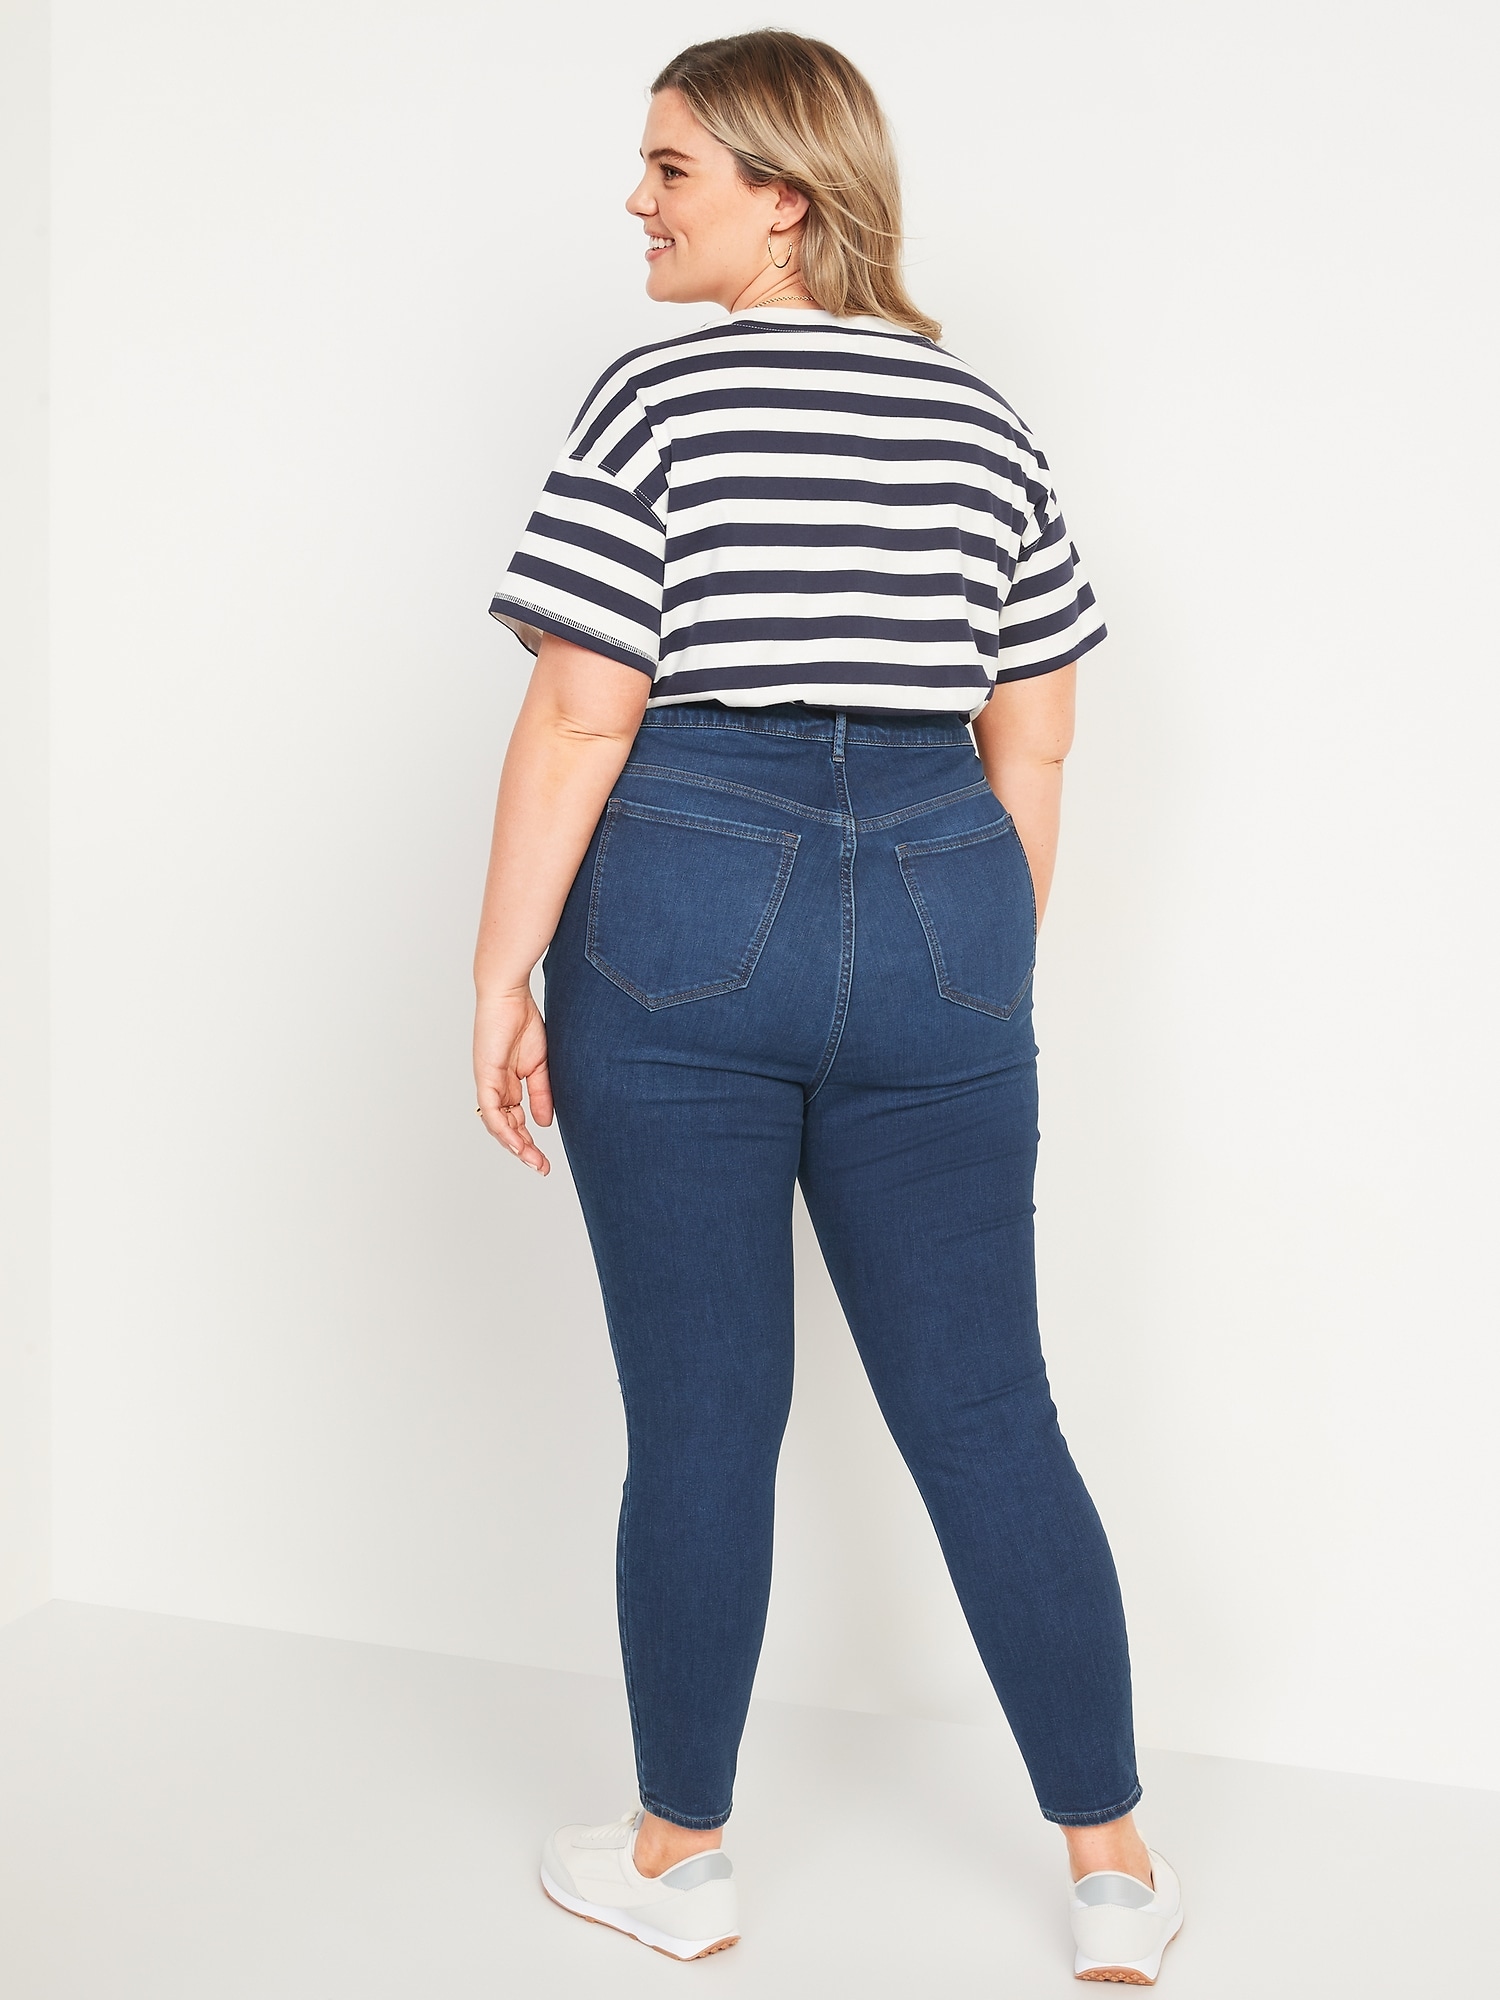 Old Navy High-Waisted Jeans for FitsYou Super-Skinny Ripped Rockstar 3-Sizes-in-1 Extra Women |